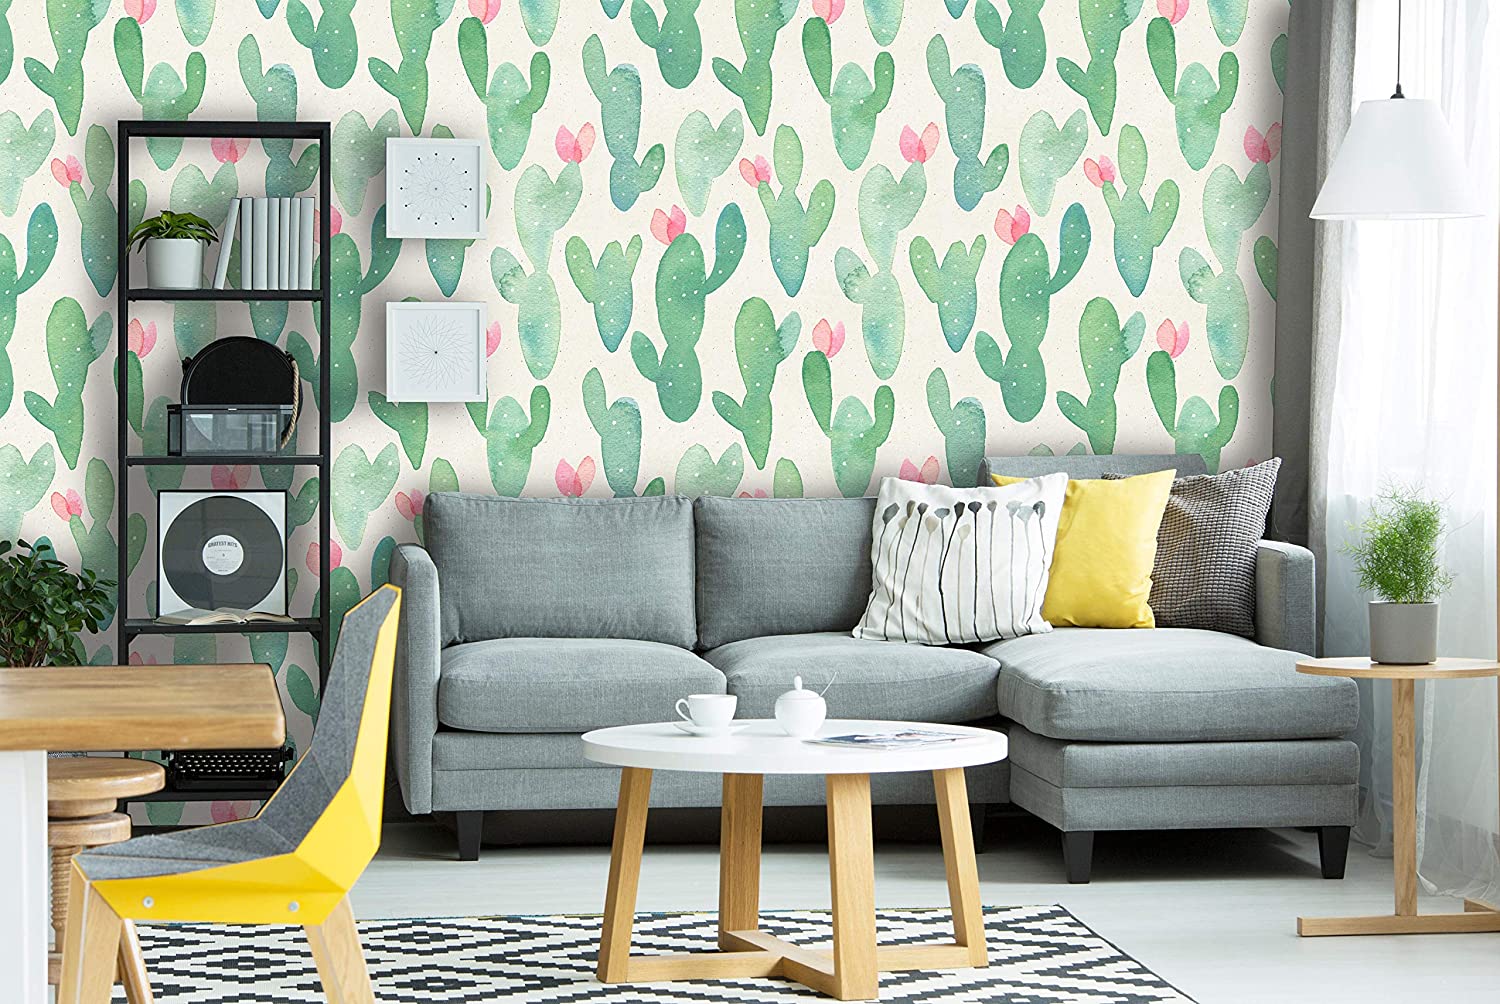 Removable Peel N Stick Wallpaper Self Adhesive Accent Wall Mural